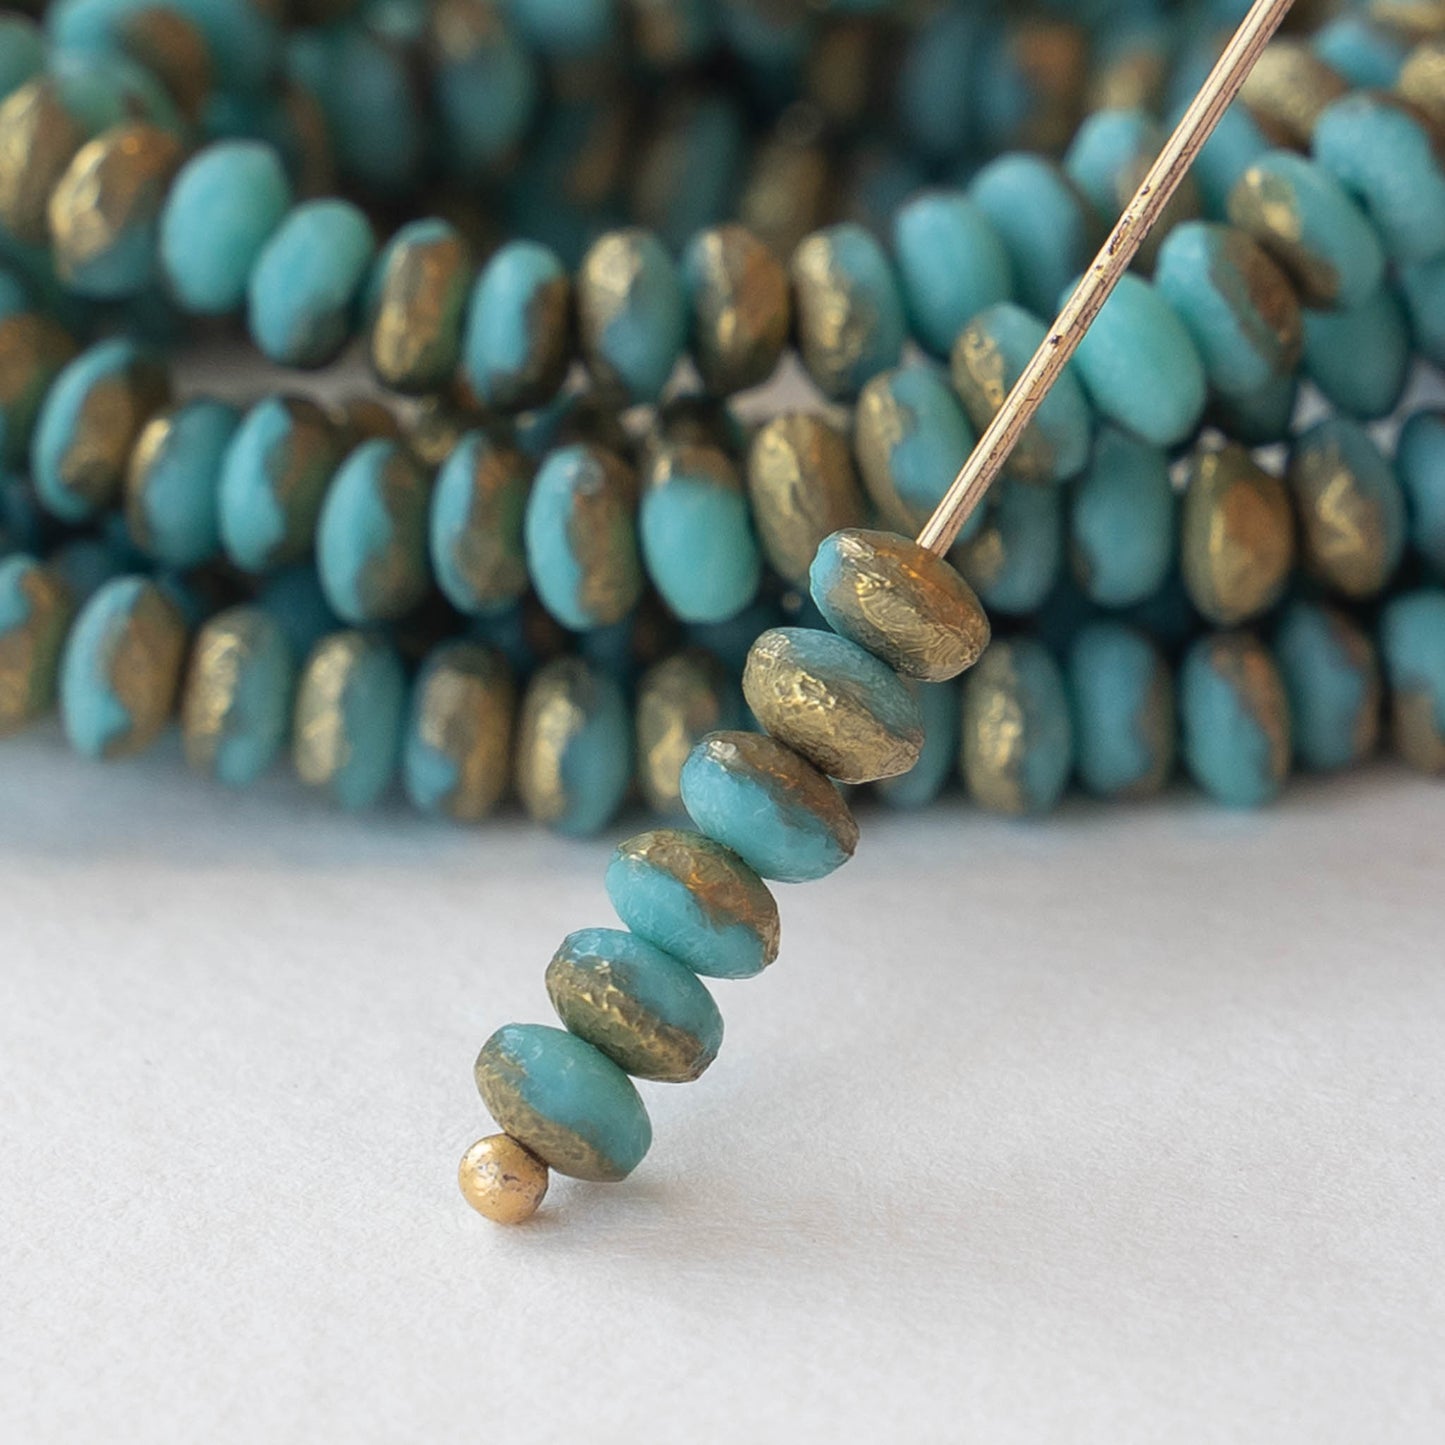 3x4mm Faceted Rondelle Beads - Opaque Etched Turquoise with Gold - 50 –  funkyprettybeads